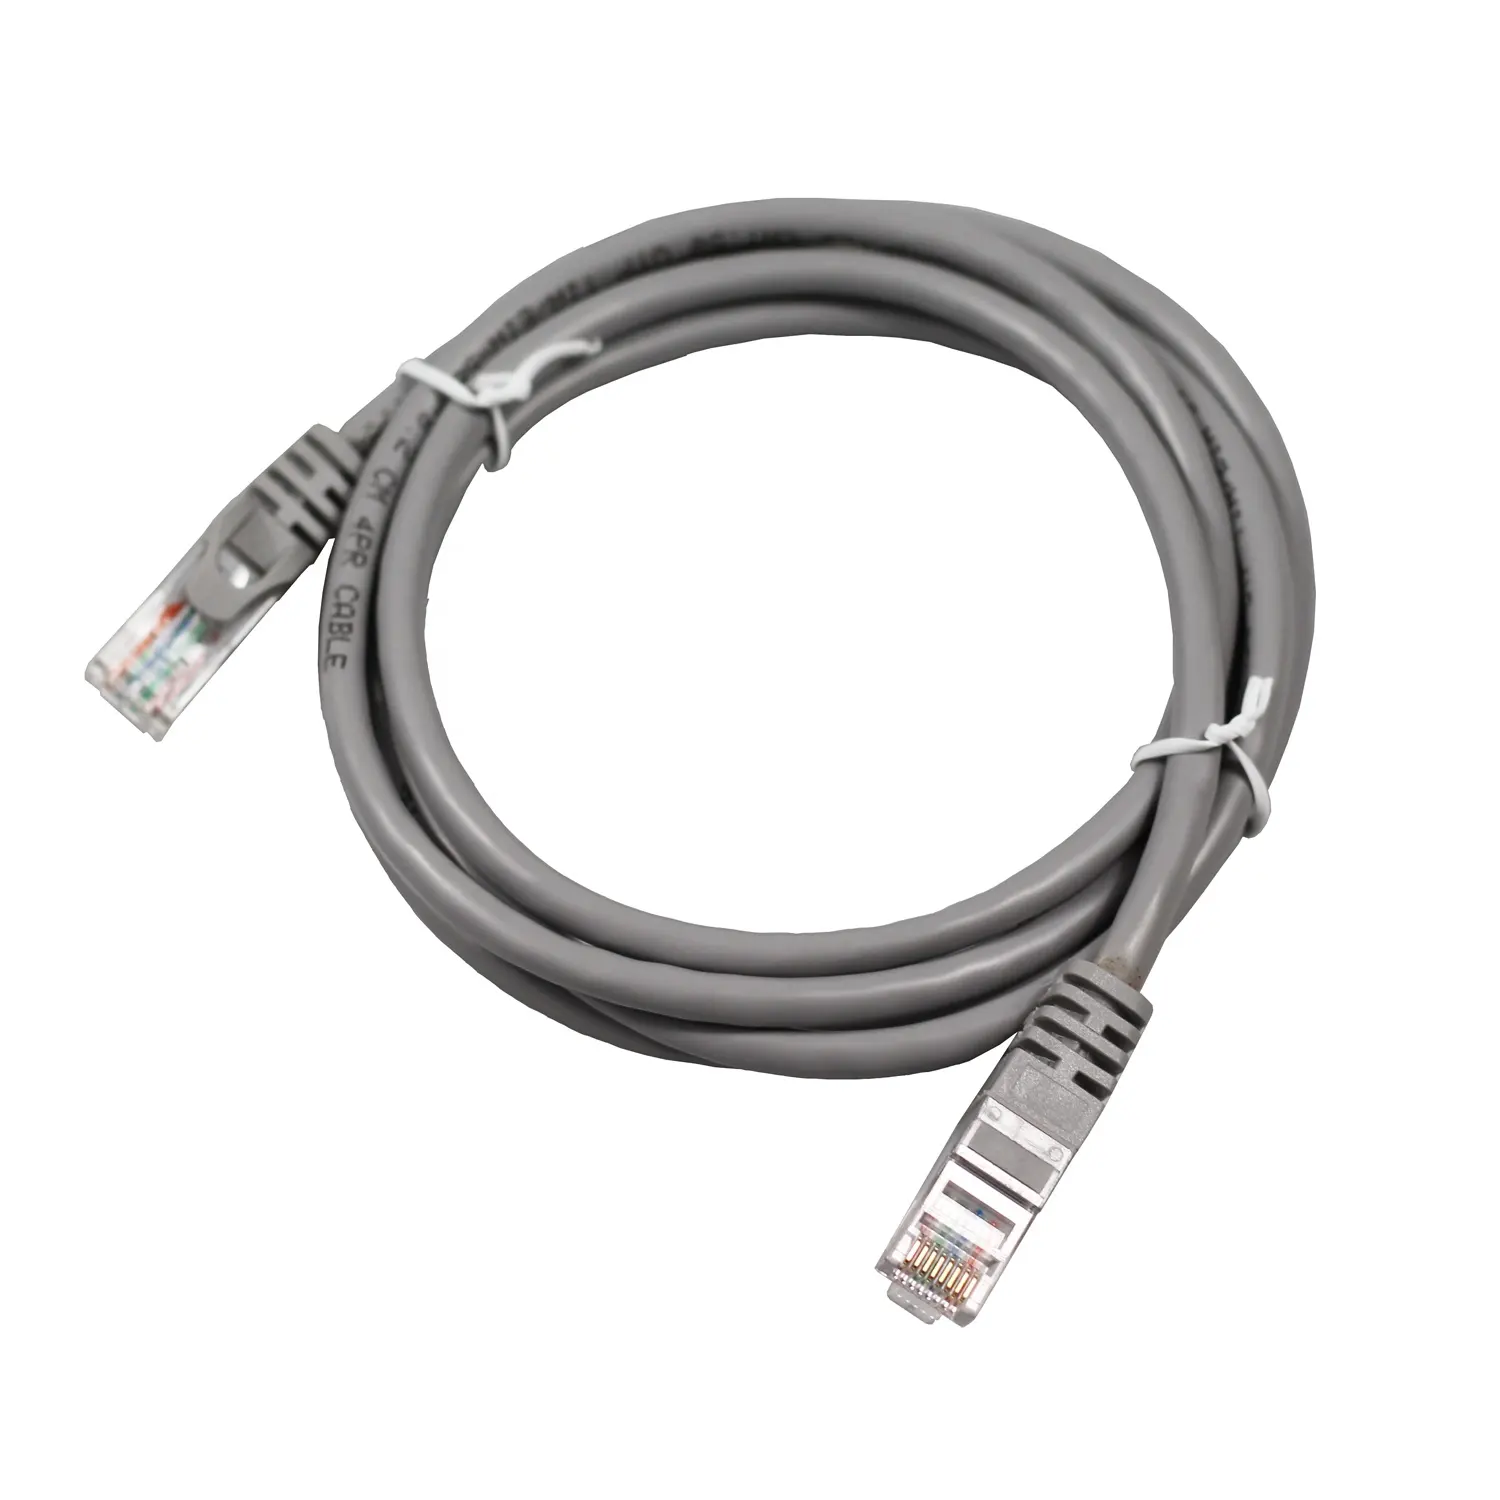 Cat.5E UTP patch cord 26AWG stranded twisted pair cable 1.0 meter grey color